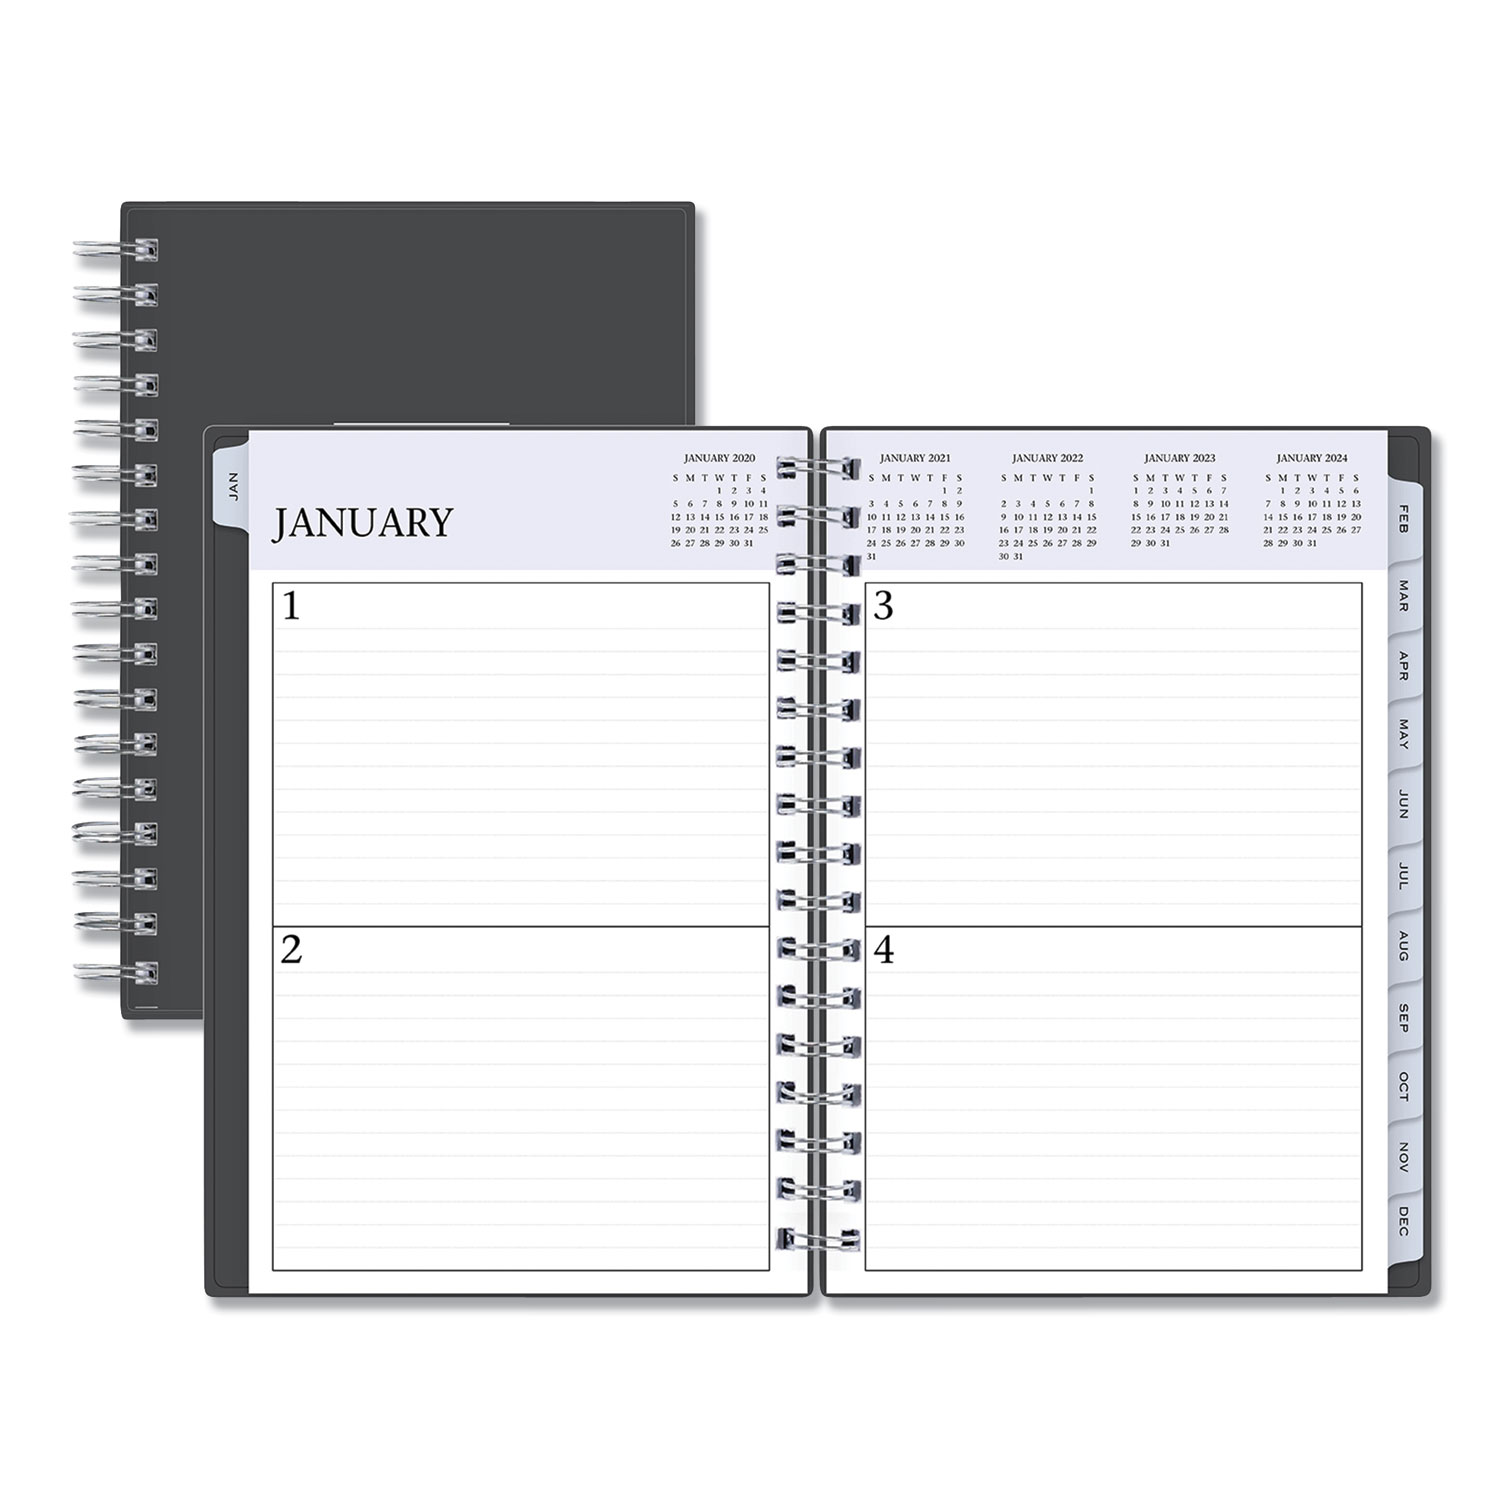  Blue Sky 113565 Passages Non-Dated Perpetual Daily Planner, 8 1/2 x 5 1/2, Black Cover,2020-2025 (BLS113565) 